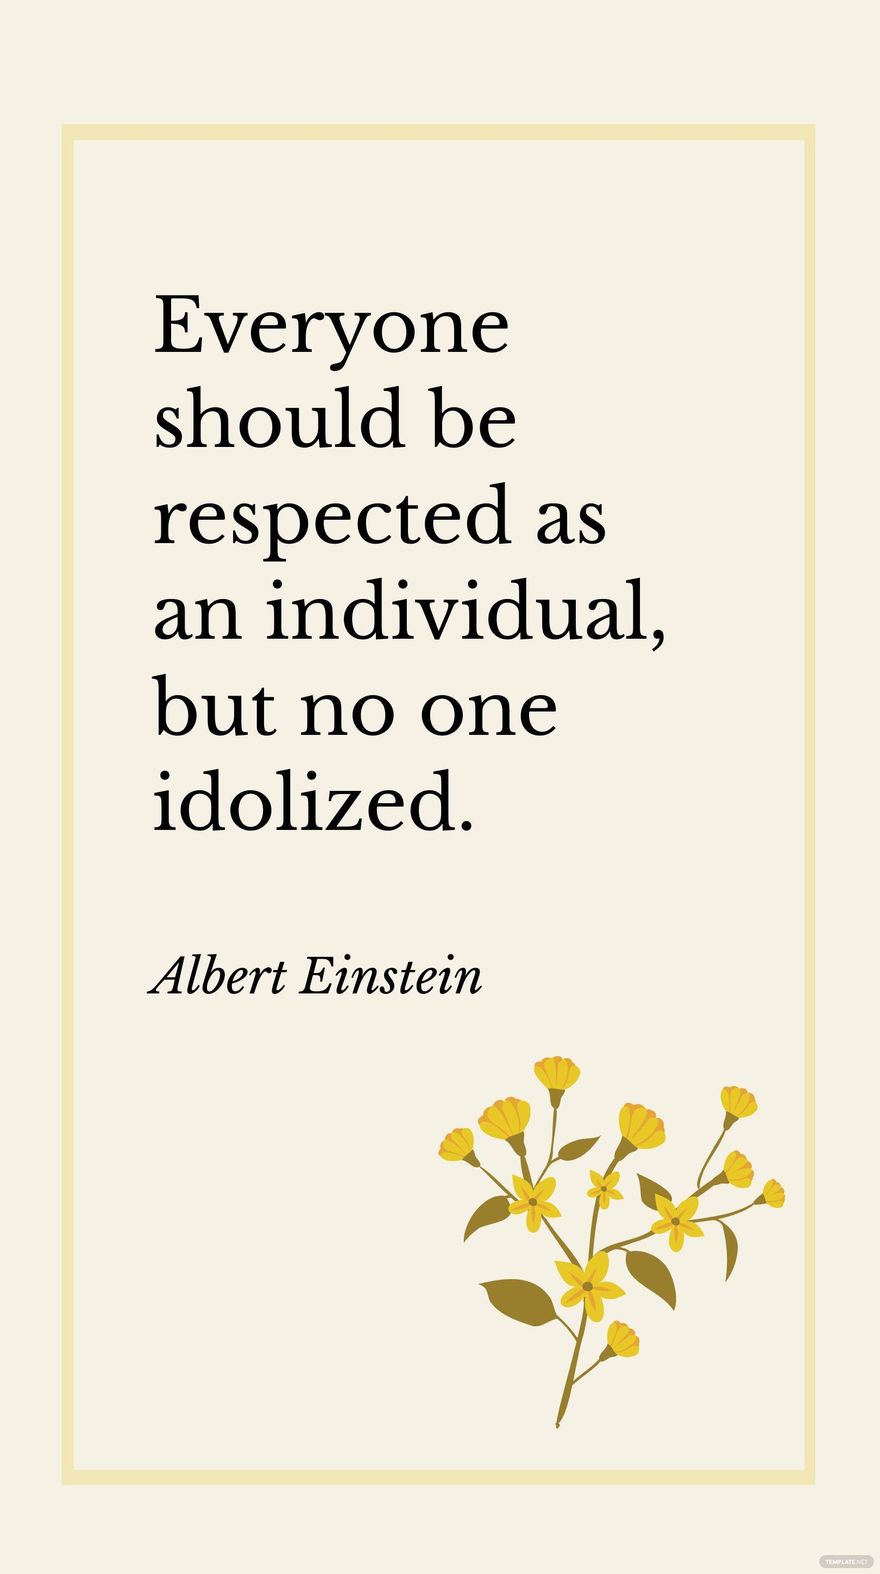 Free Albert Einstein - Everyone should be respected as an individual, but no one idolized. in JPG